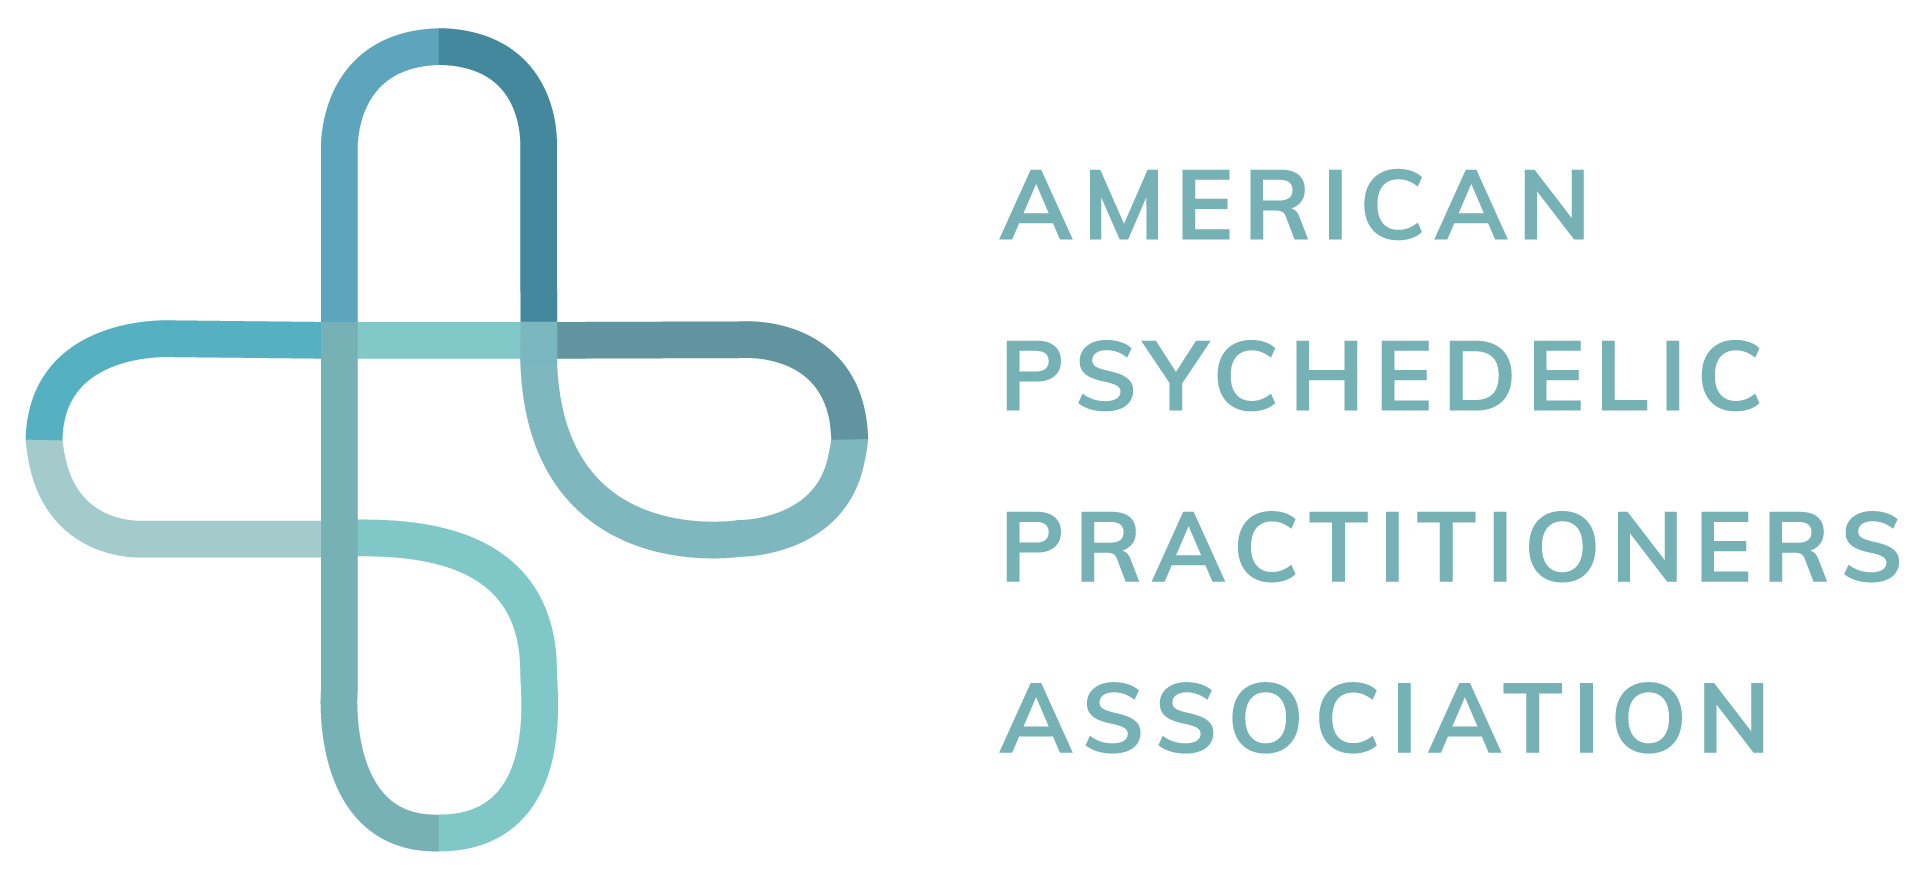 Welcome to American Psychedelic Practitioners Association Community